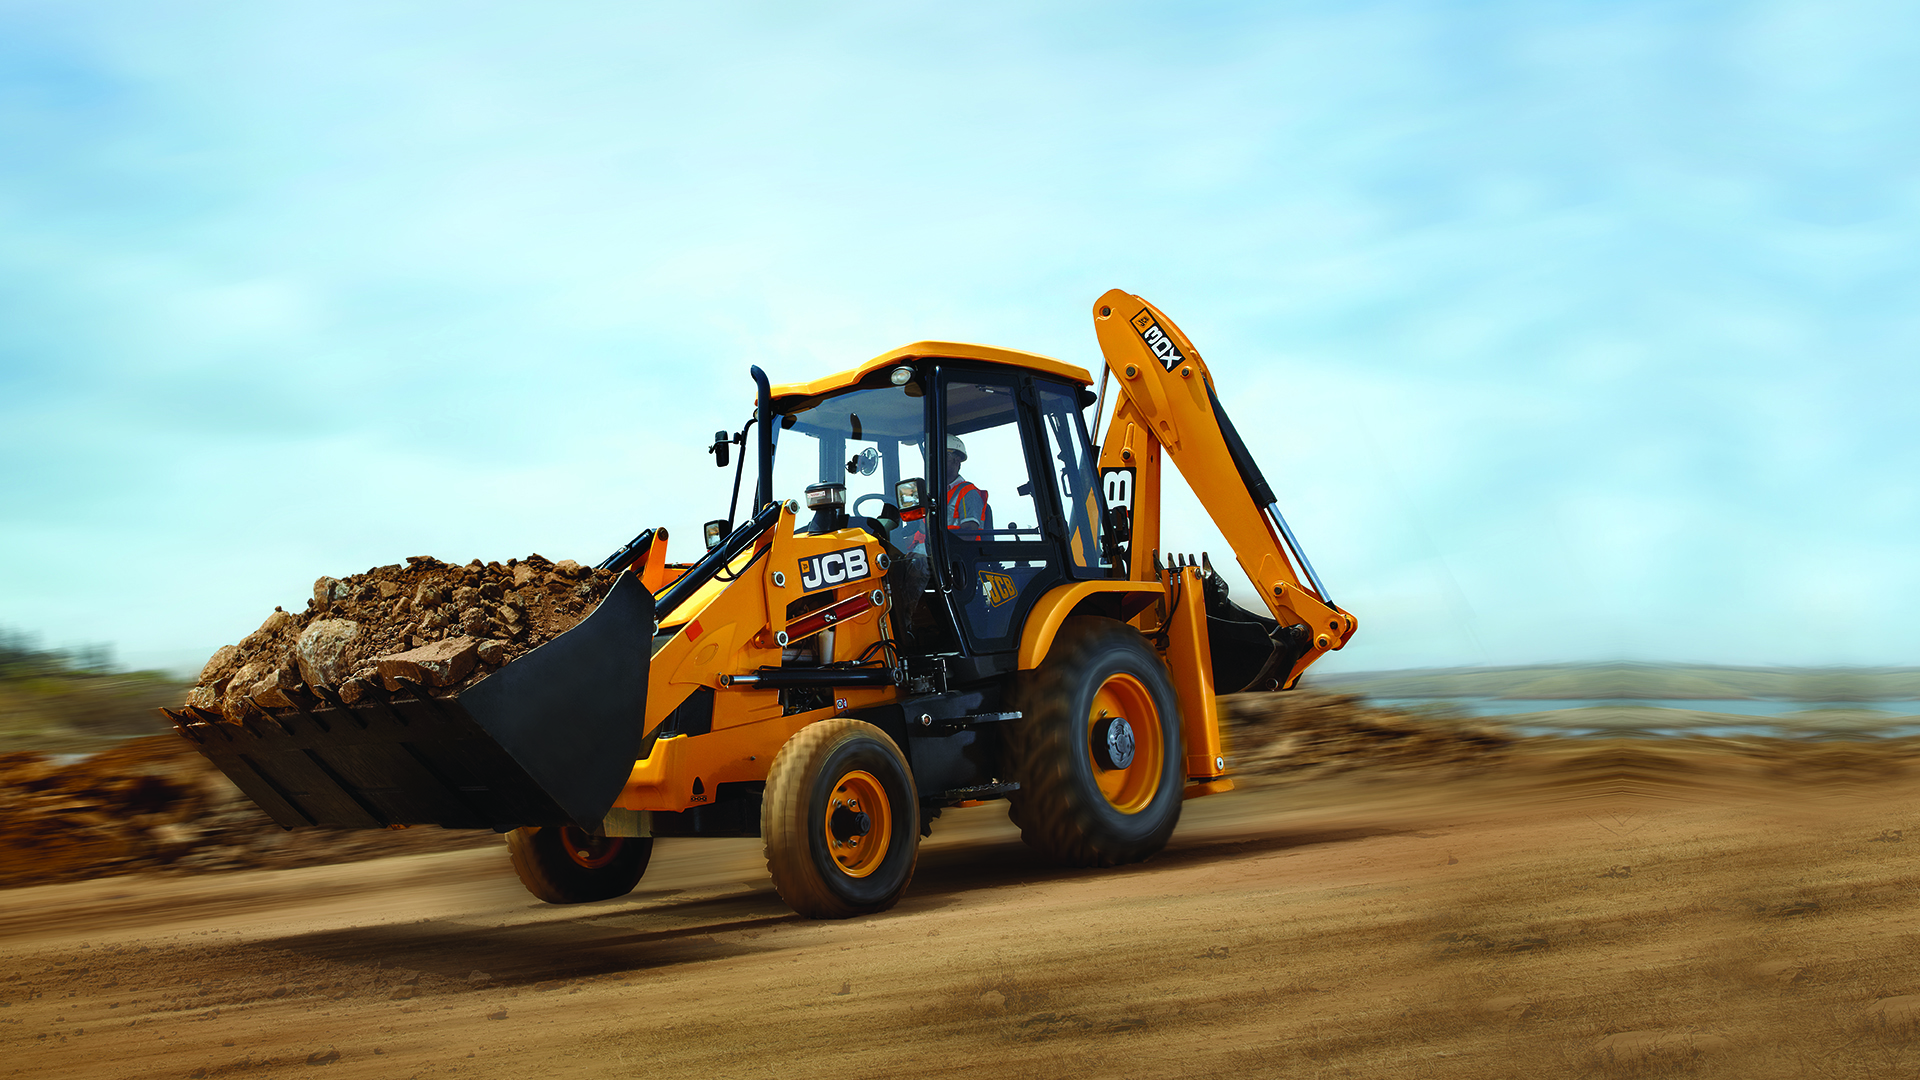 LiuGong CLG 856H front loader 2020 tractors construction machinery  loader in career HD wallpaper  Peakpx